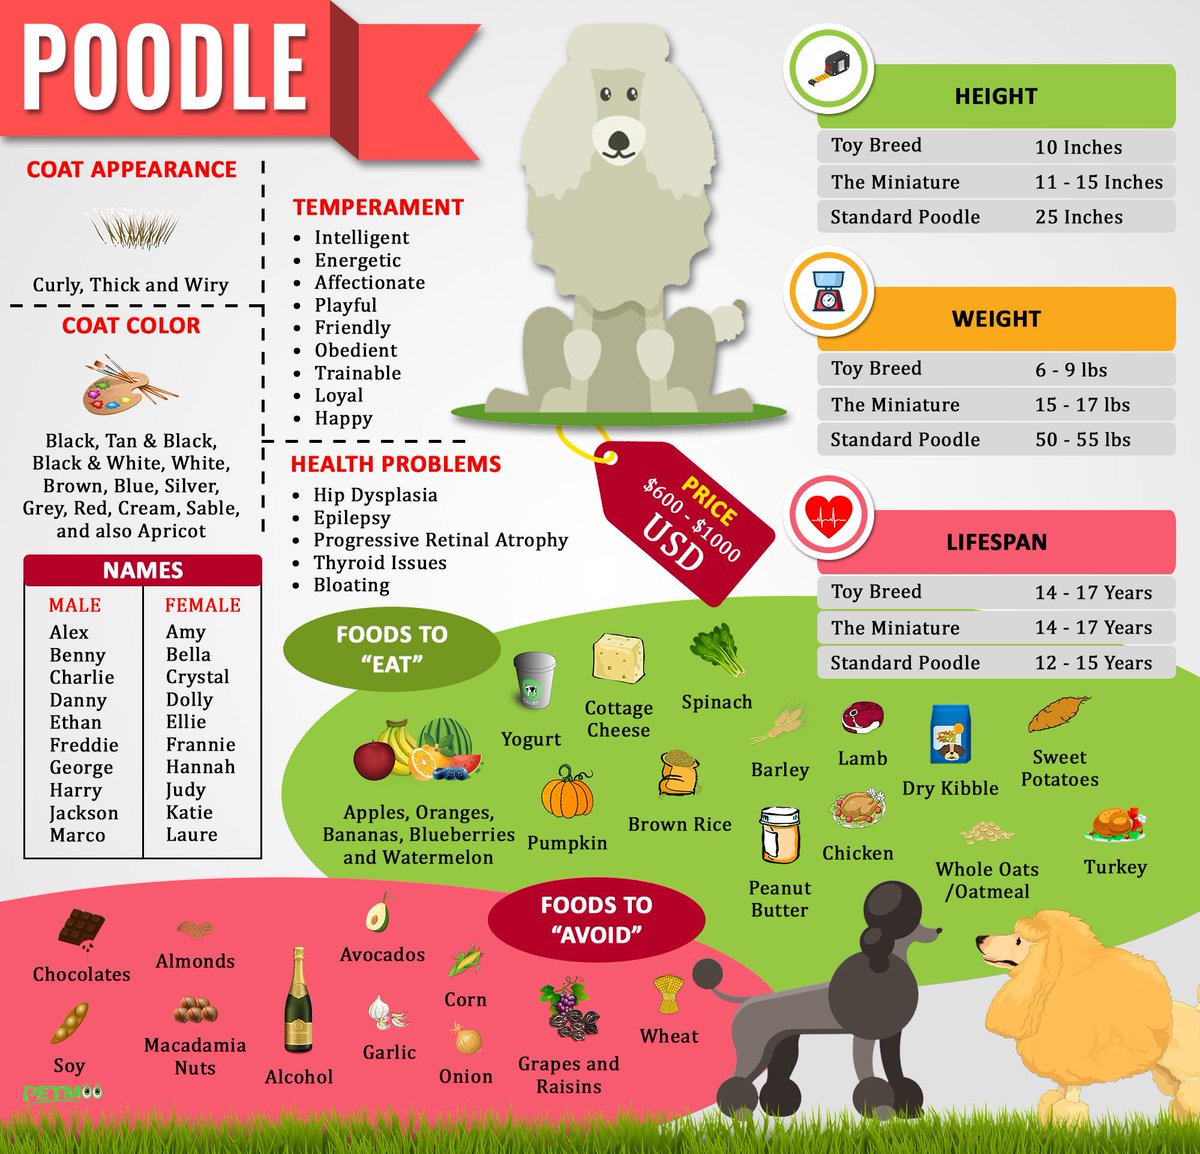 Poodle Infographic
#petmoo #pets #dogs #dogbreeds #doginfographic #poodleinfographic #poodledog #poodlebreeds